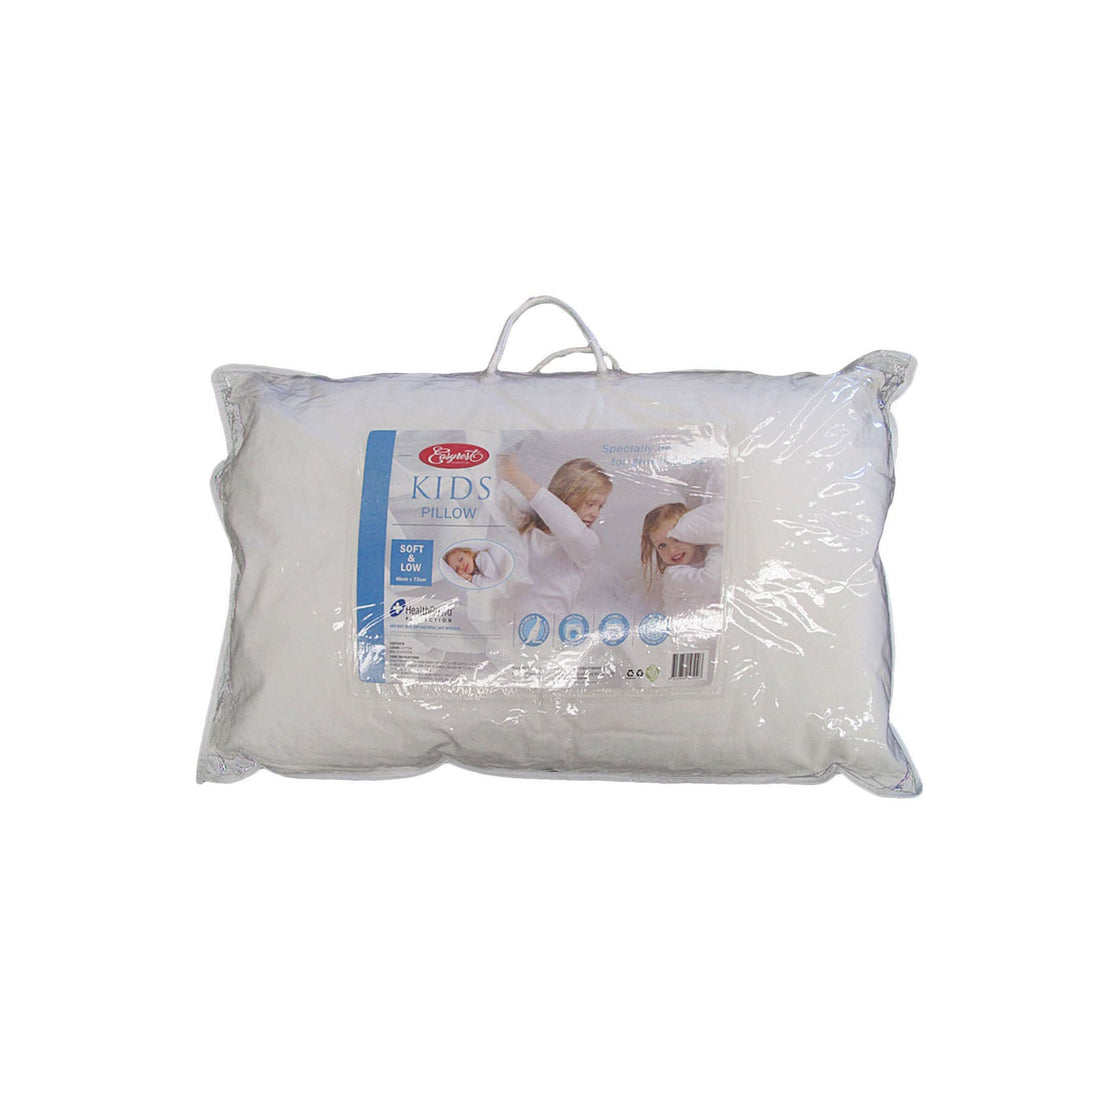 Kids Pillow Soft and Low